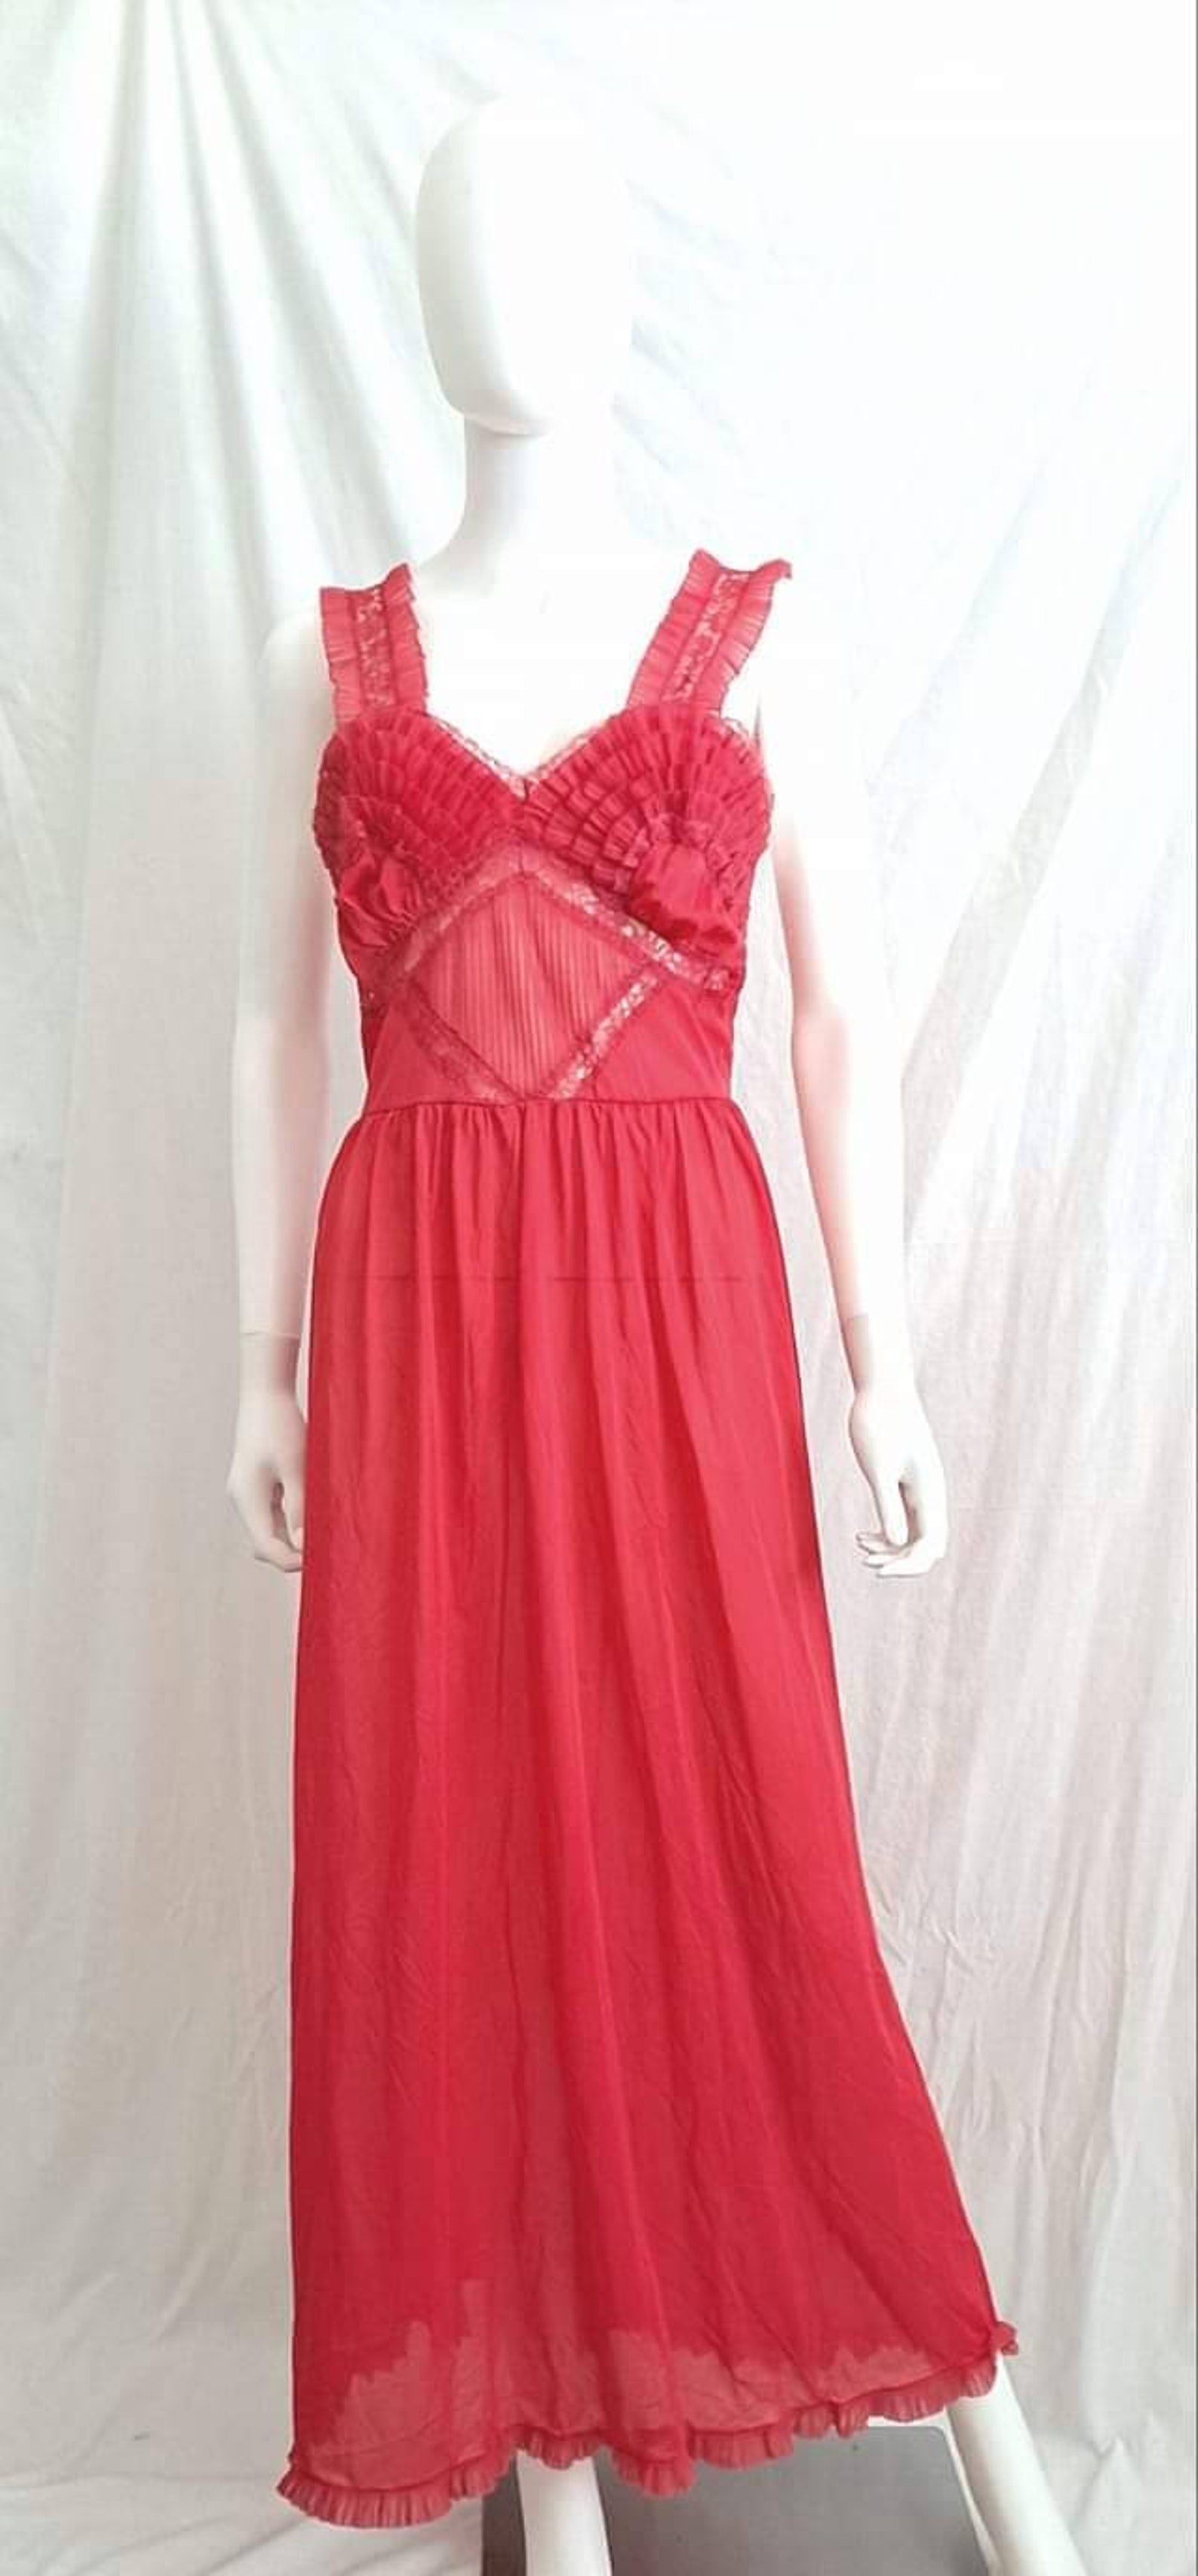 1950s Sheer Red Ruffled Negligee Nightgown by Snowdon 36 Bust - Etsy UK